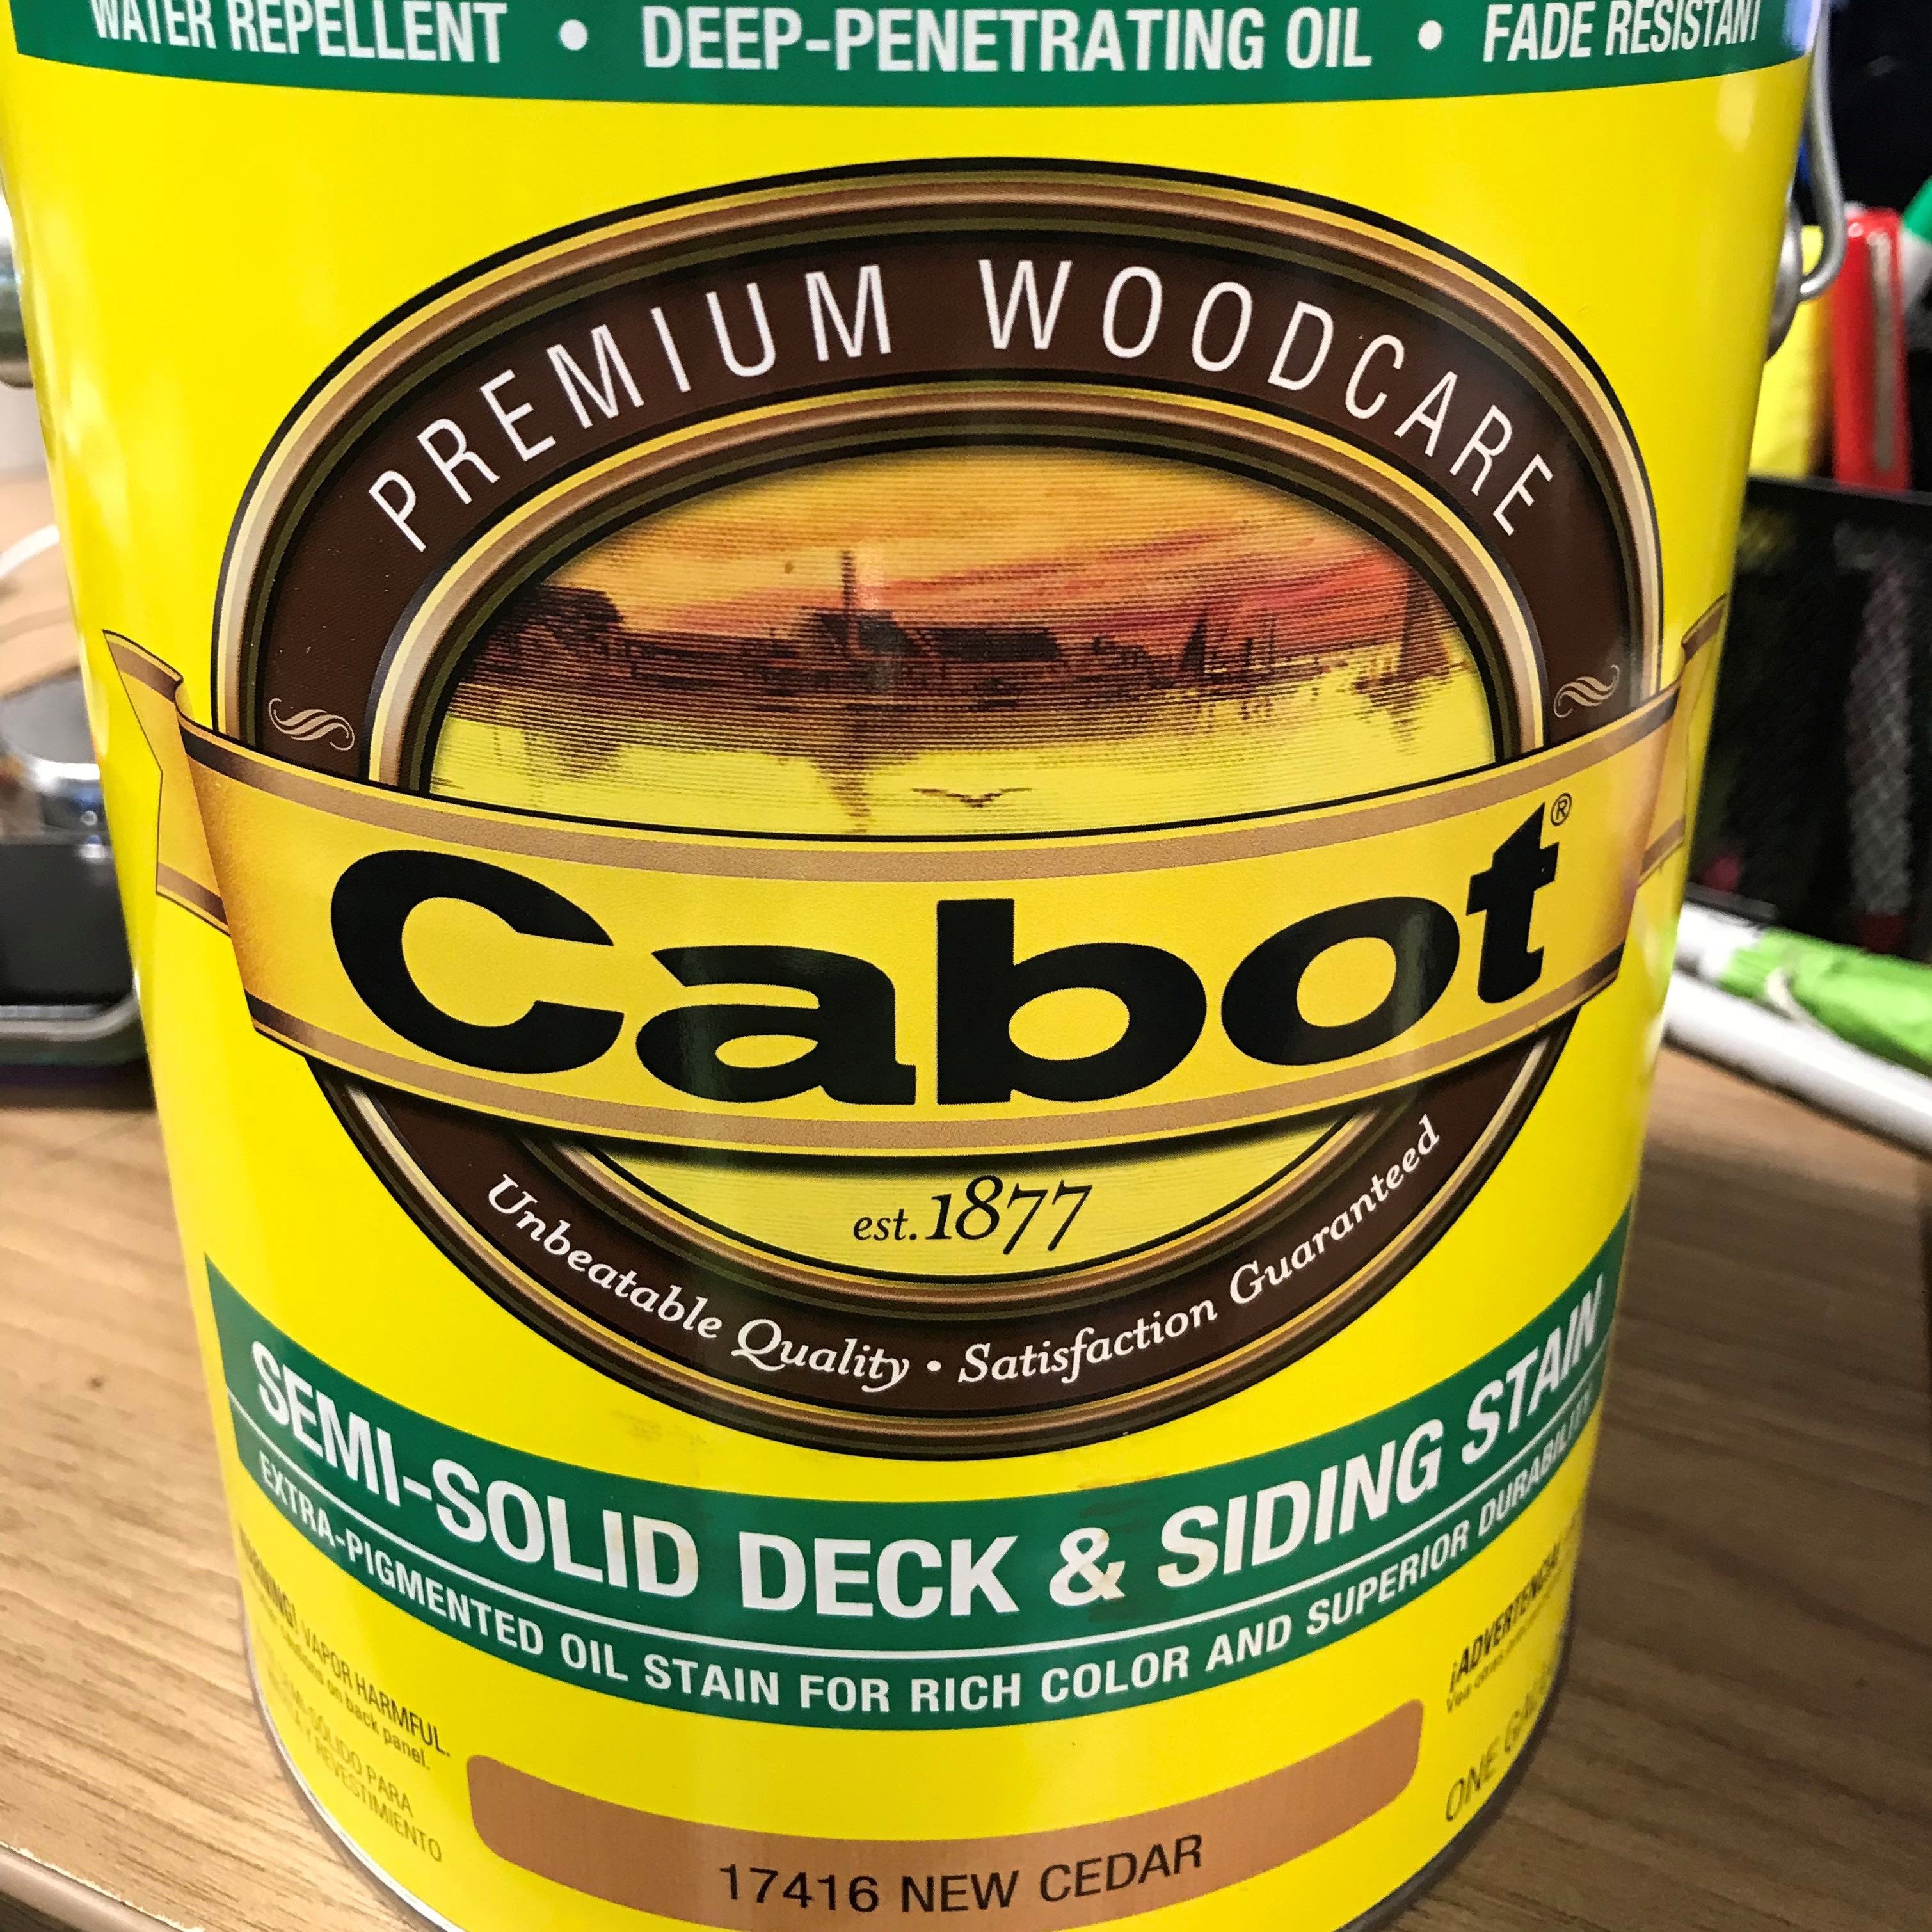 1 Gallon Cabot Semi-Solid Deck & Siding 17416 New Cedar Extra Pigmented Oil Stain